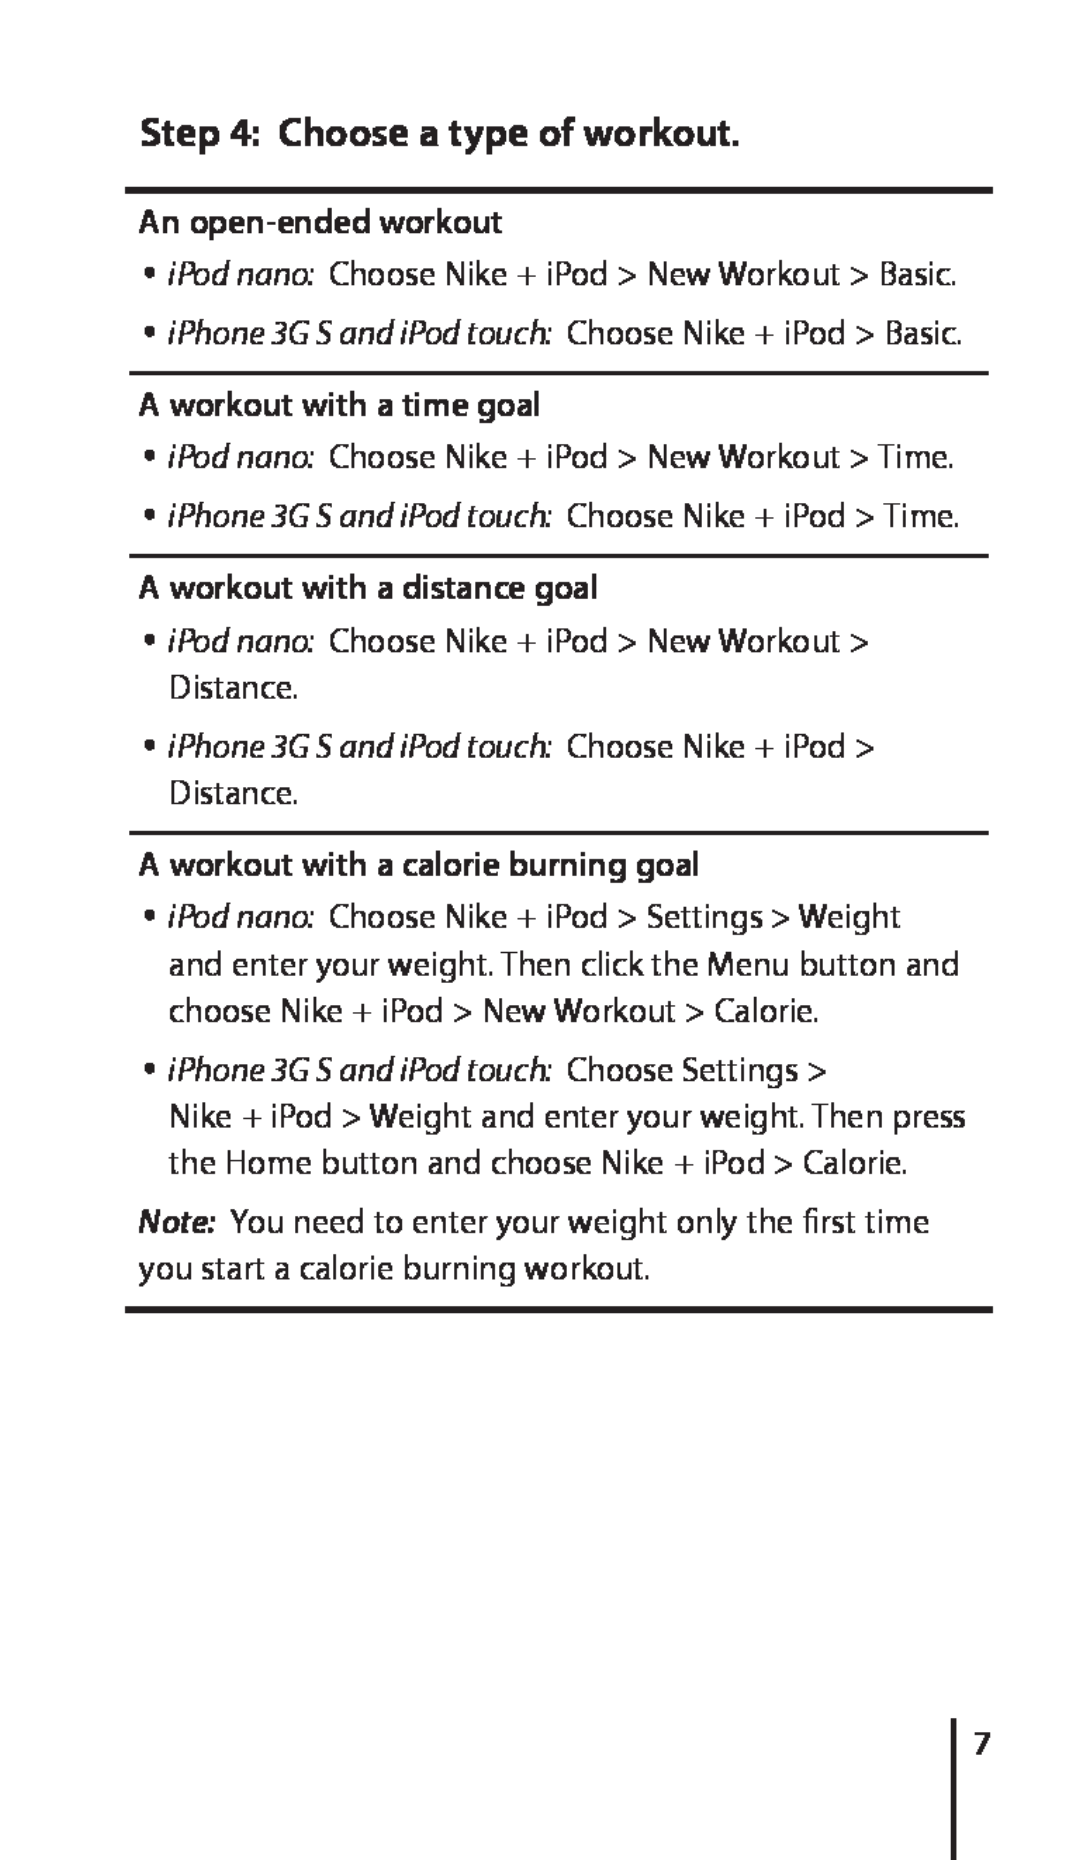 Apple 034-4945-A Choose a type of workout, An open-ended workout, ÂÂiPhone 3G S and iPod touch Choose Nike + iPod Basic 